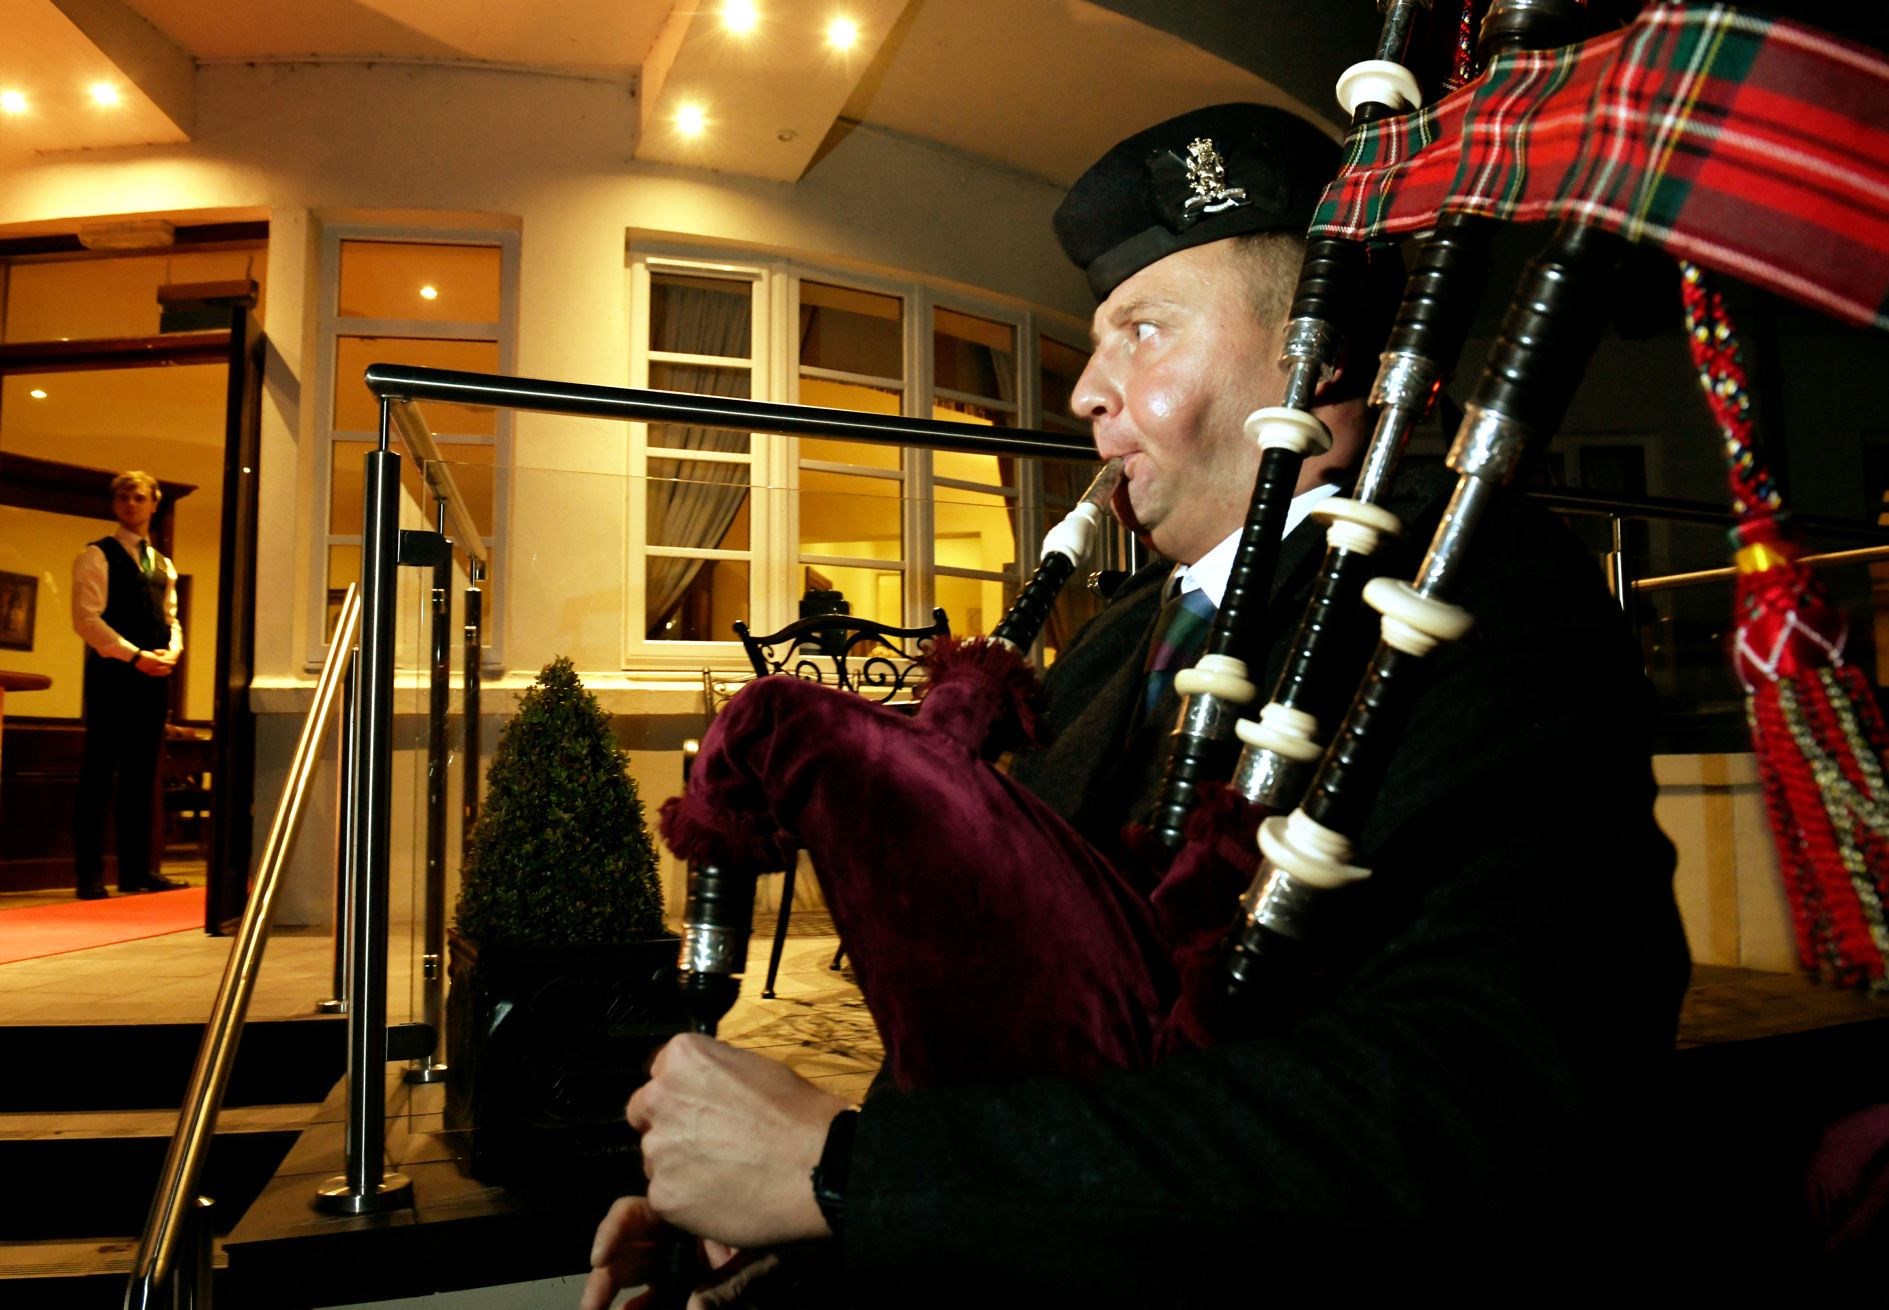 Piper at the door as guests entered. Picture: James Mackenzie